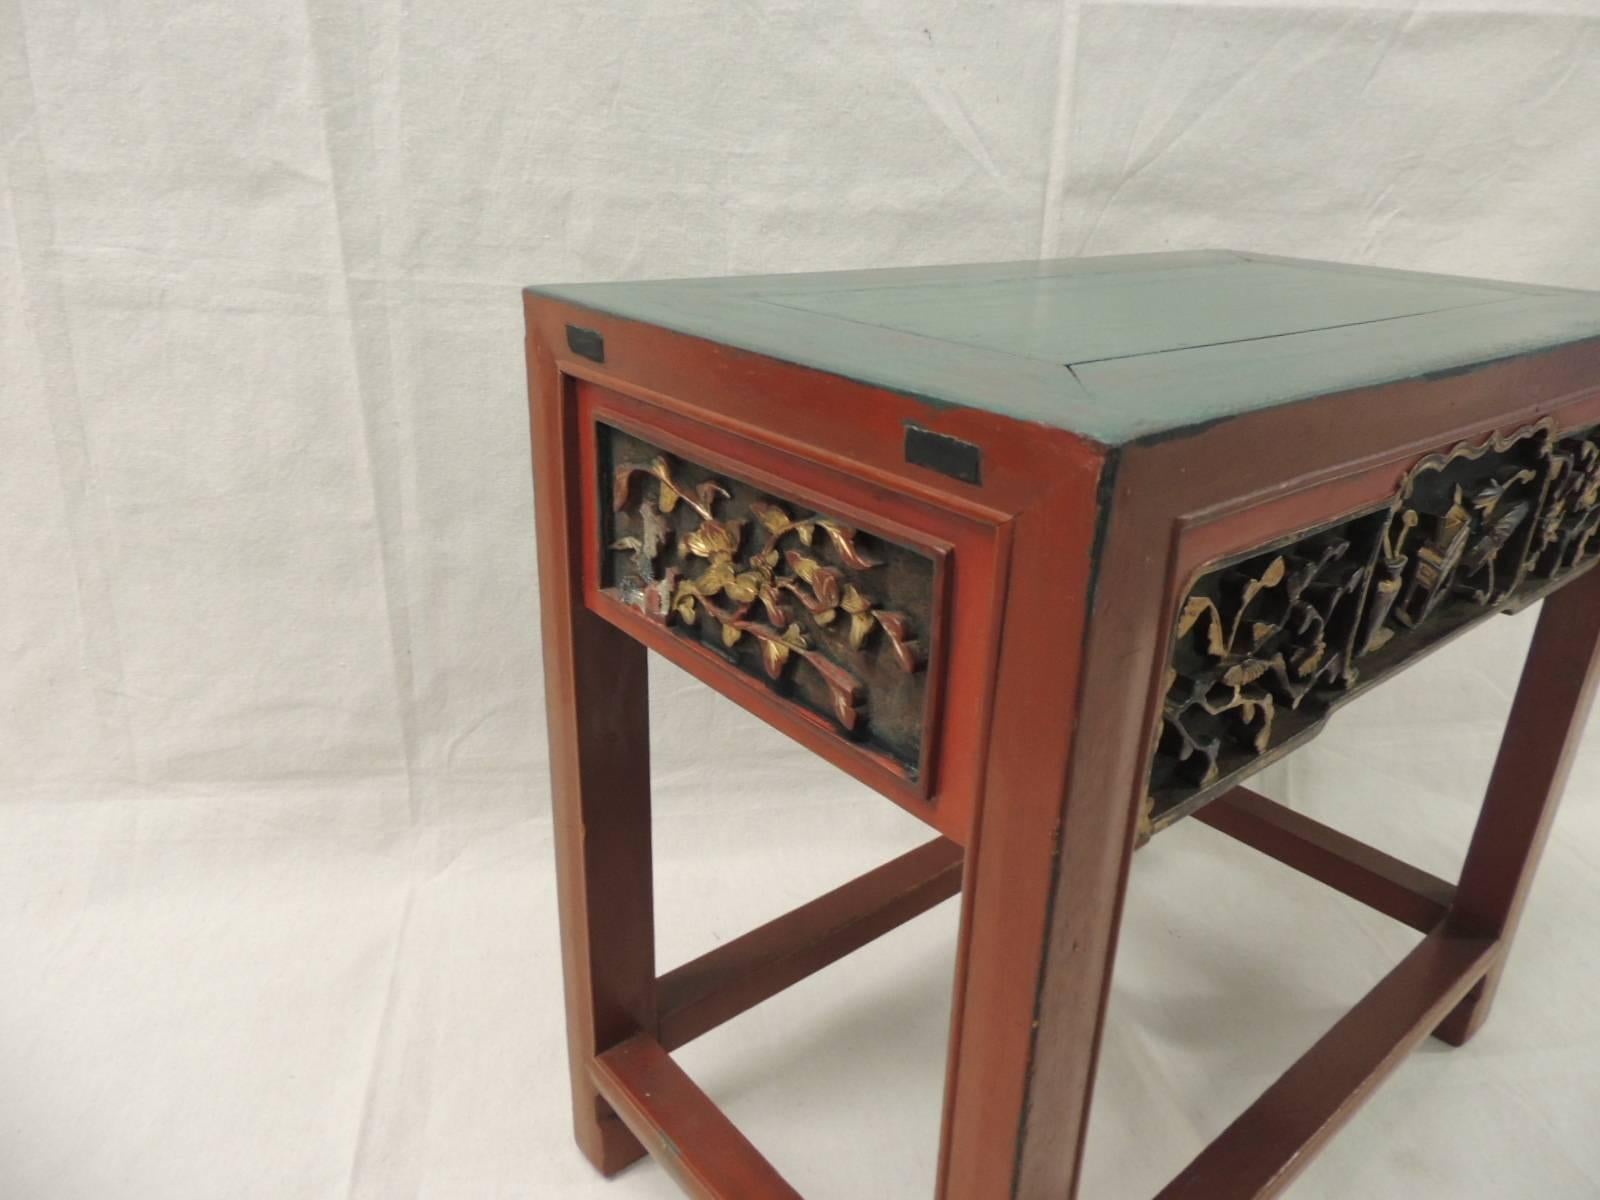 Offered by the Antique Textiles Galleries:
Red wood Chinese lacquered side table. Red lacquer and gold accents with a jade green painted top. 
Carving on top front, back and all around.
Size: 11 x 19.5 x 18.